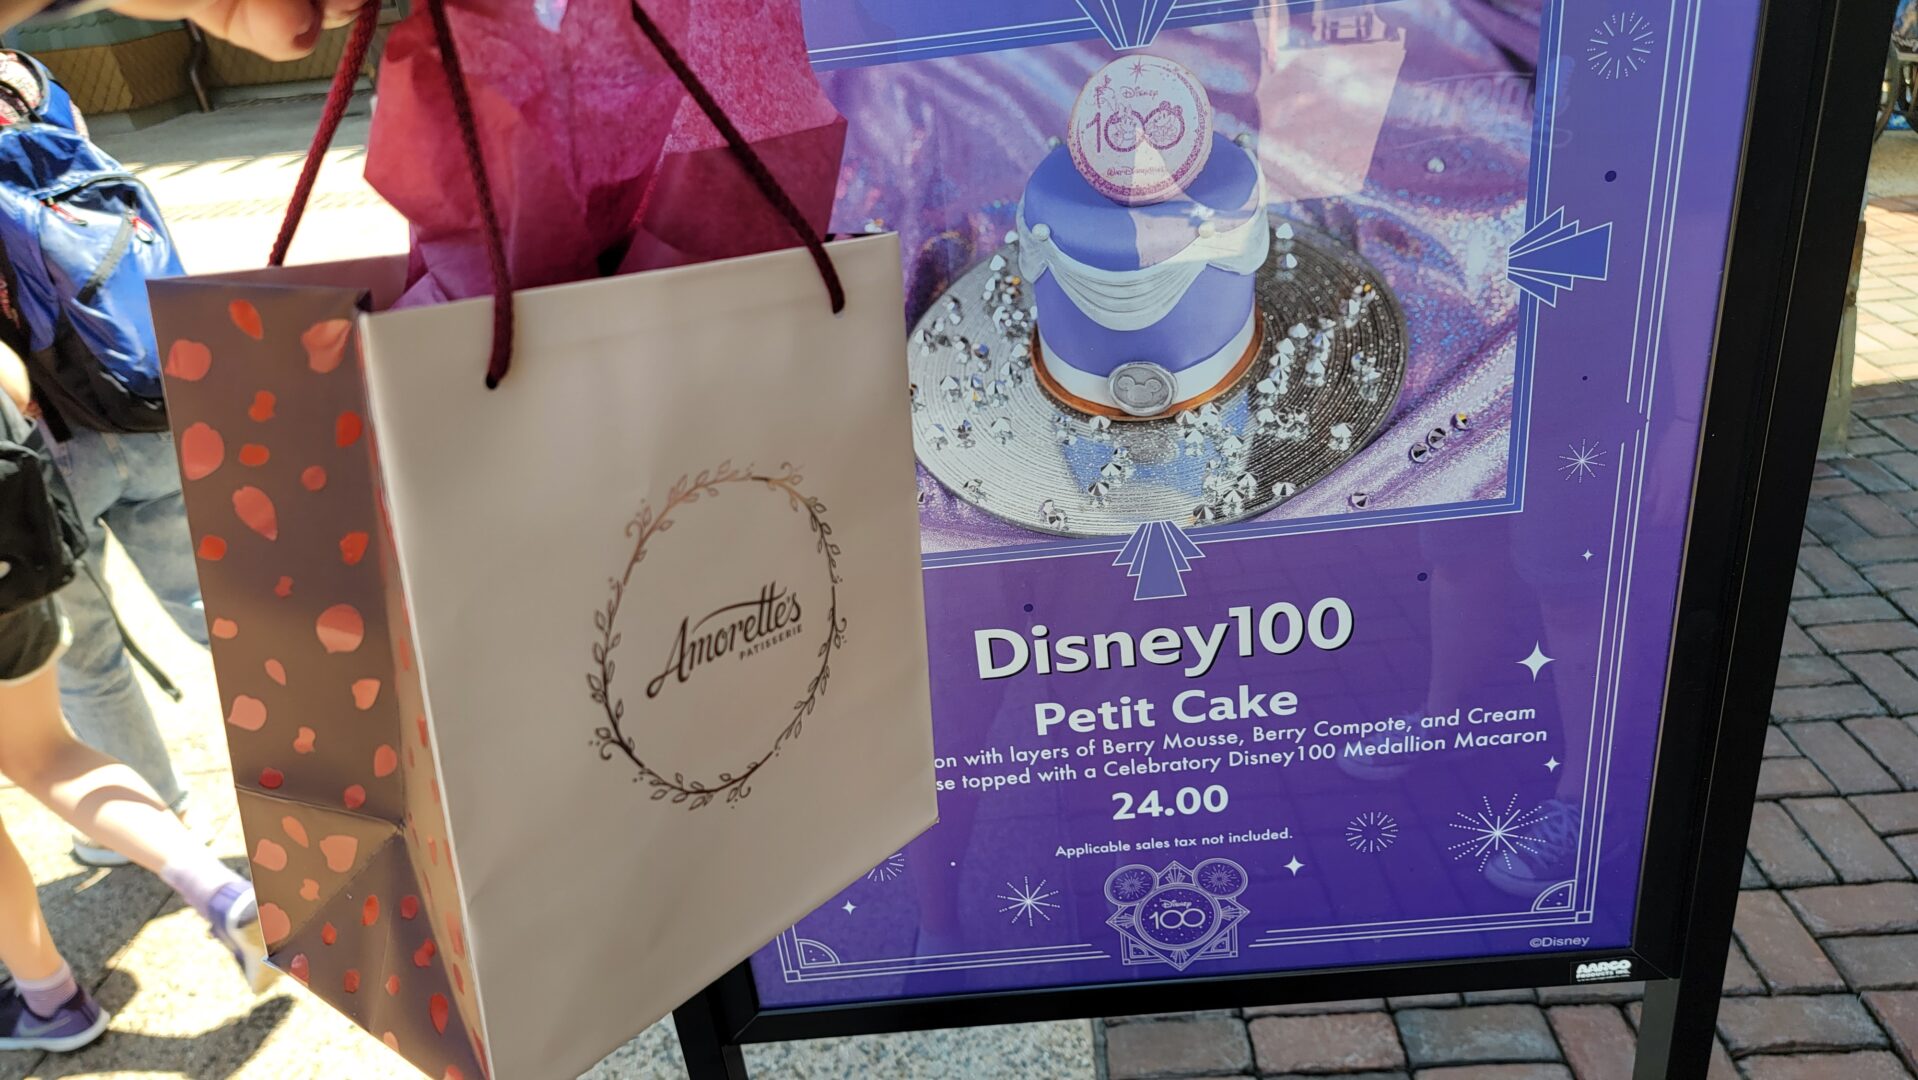 Check out the New Disney 100 Petite Cake from Amorette’s in Disney Springs